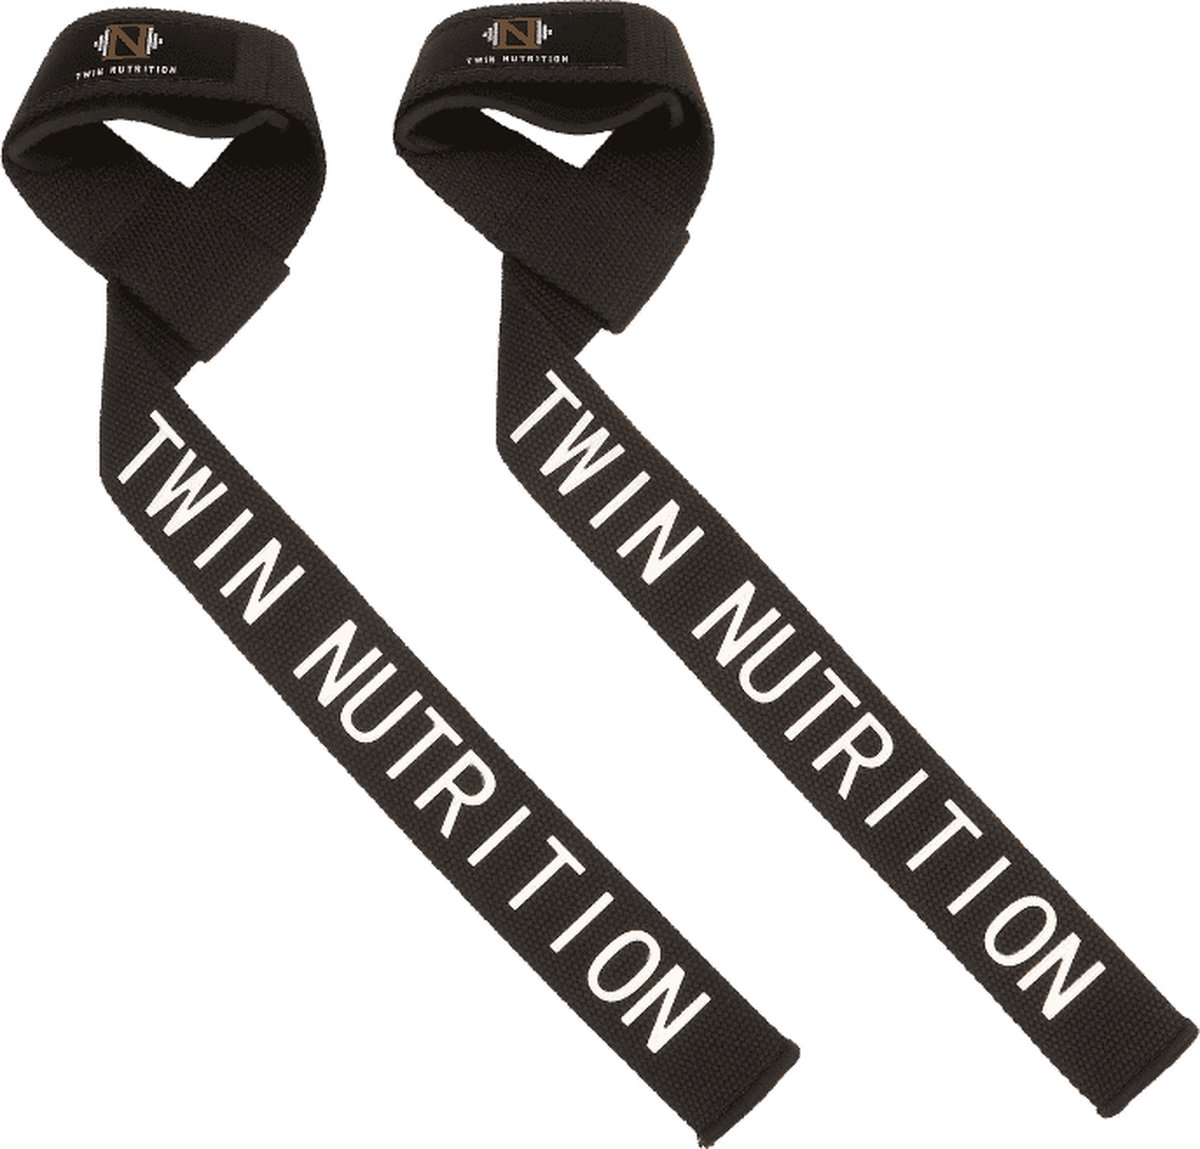 Twin Nutrition Lifting Straps - Fitnessaccessoires - Lifting Straps - Siliconen grip- Padding